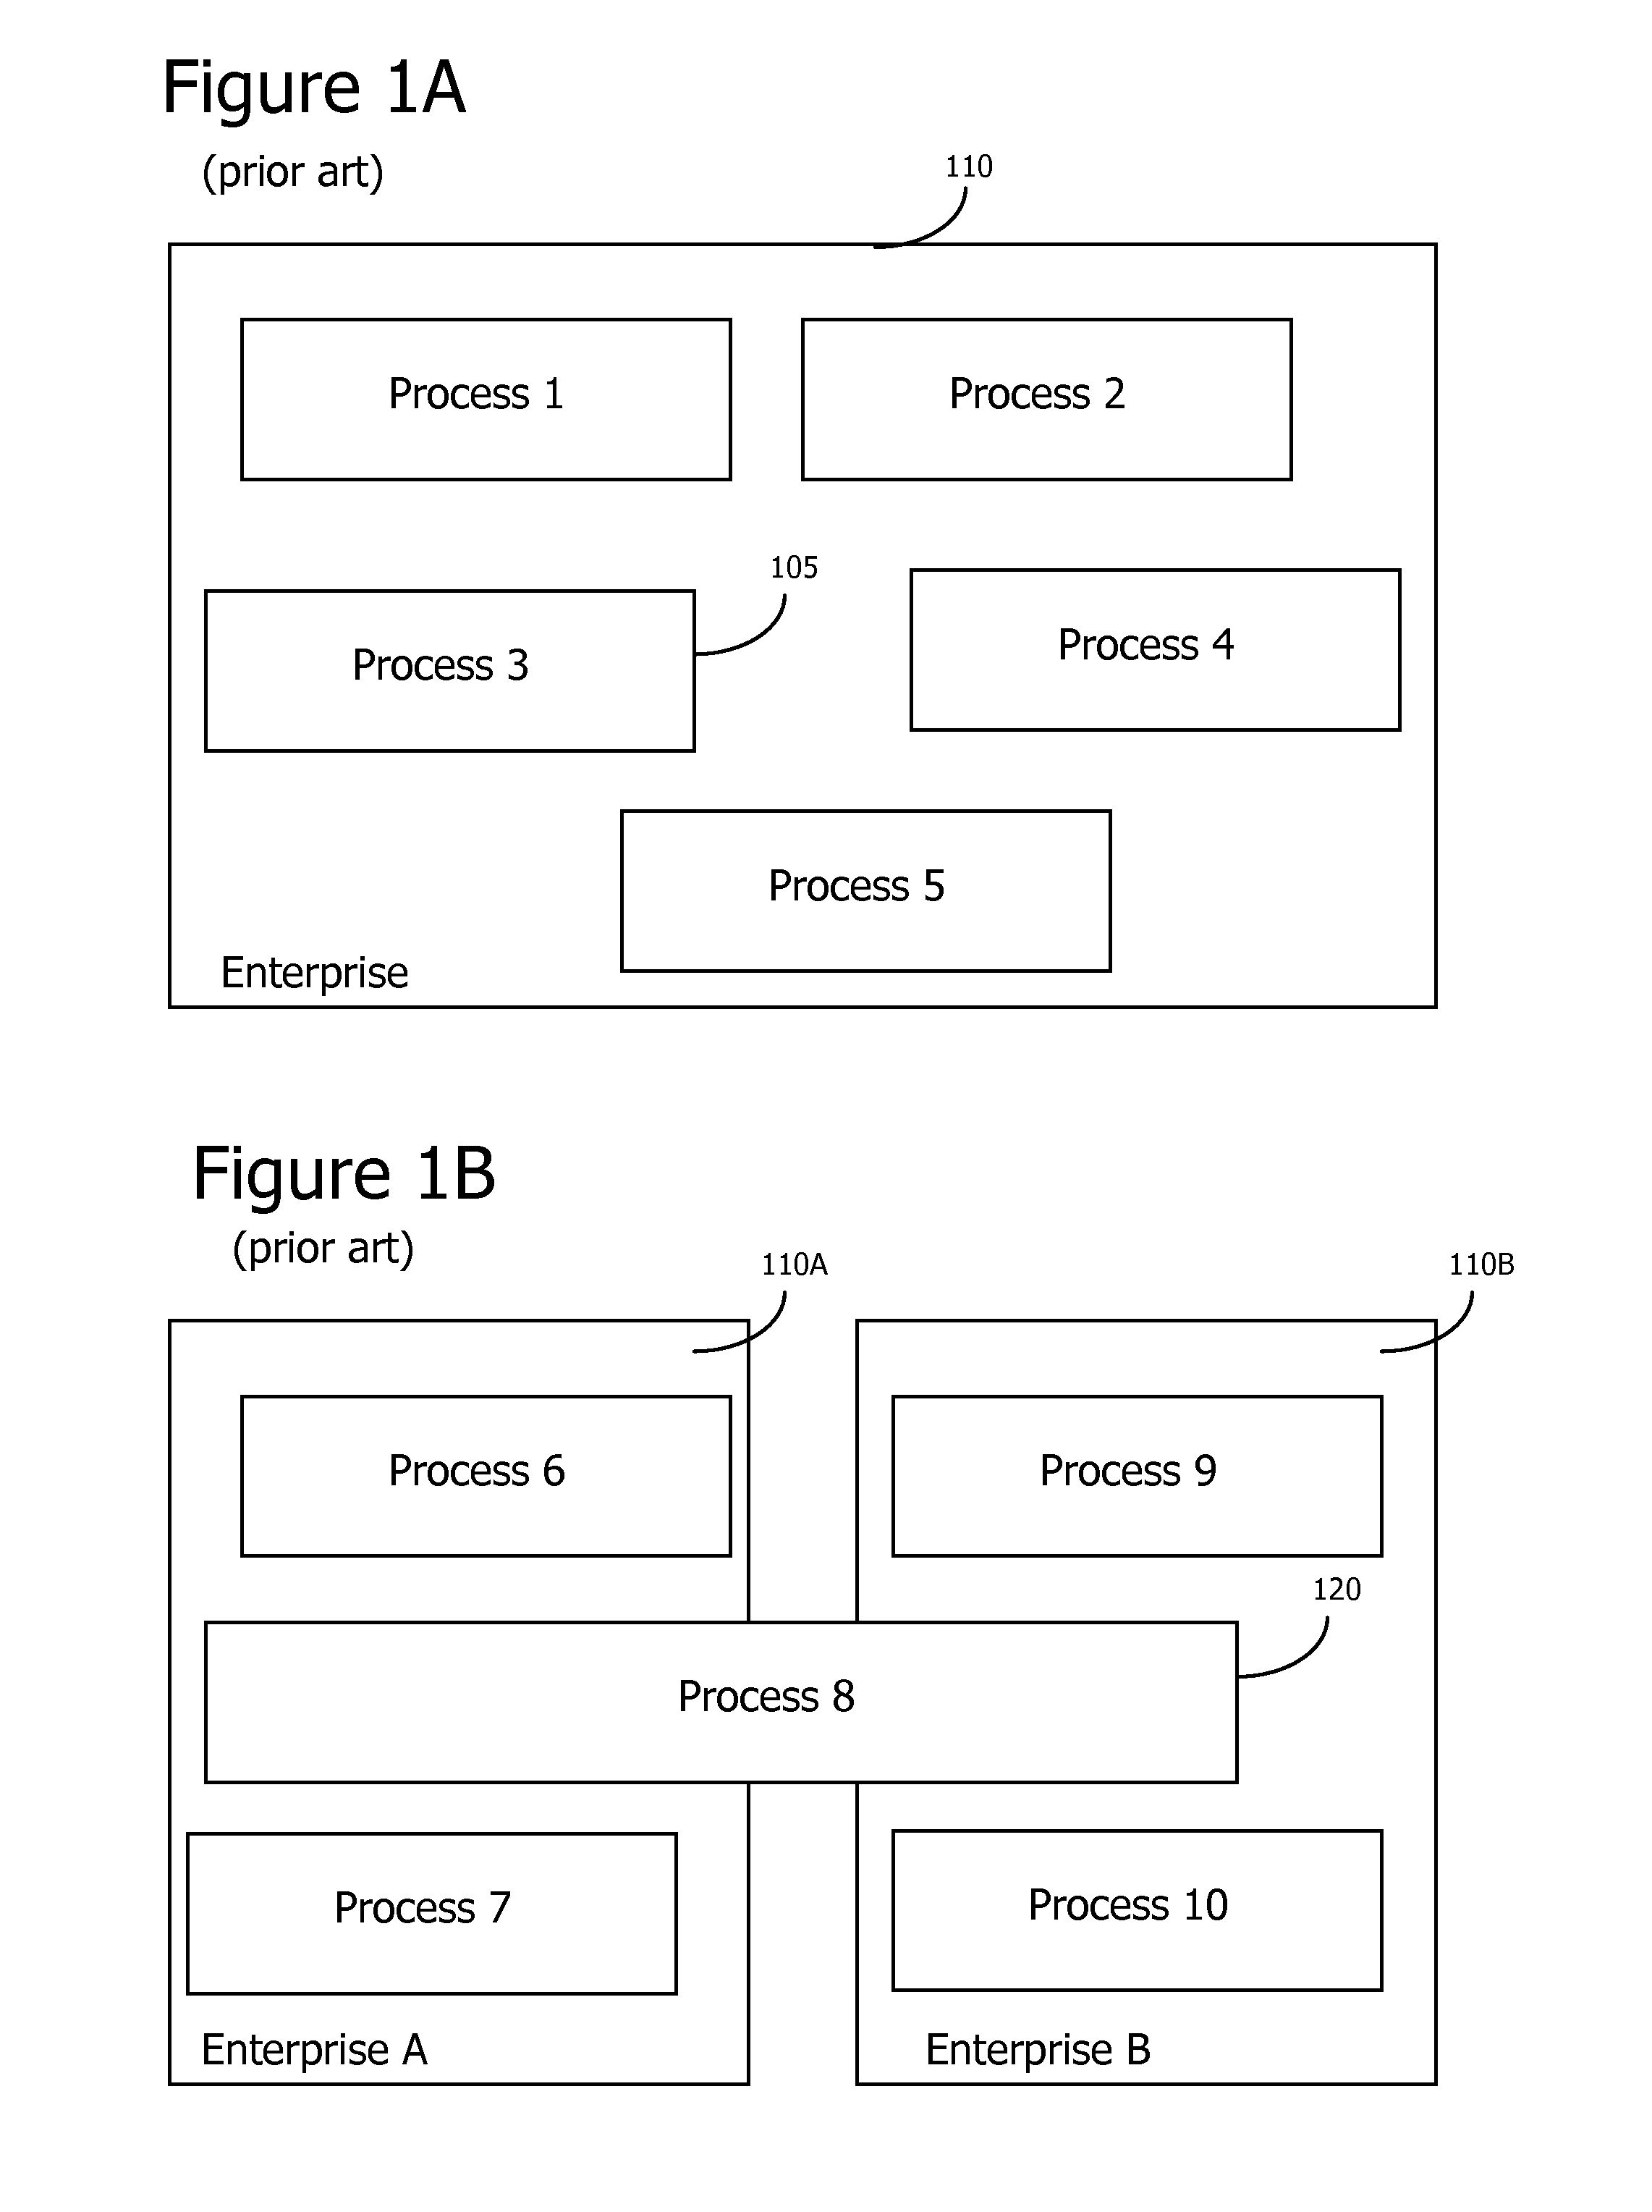 Location-Aware Adaptive Systems and Methods